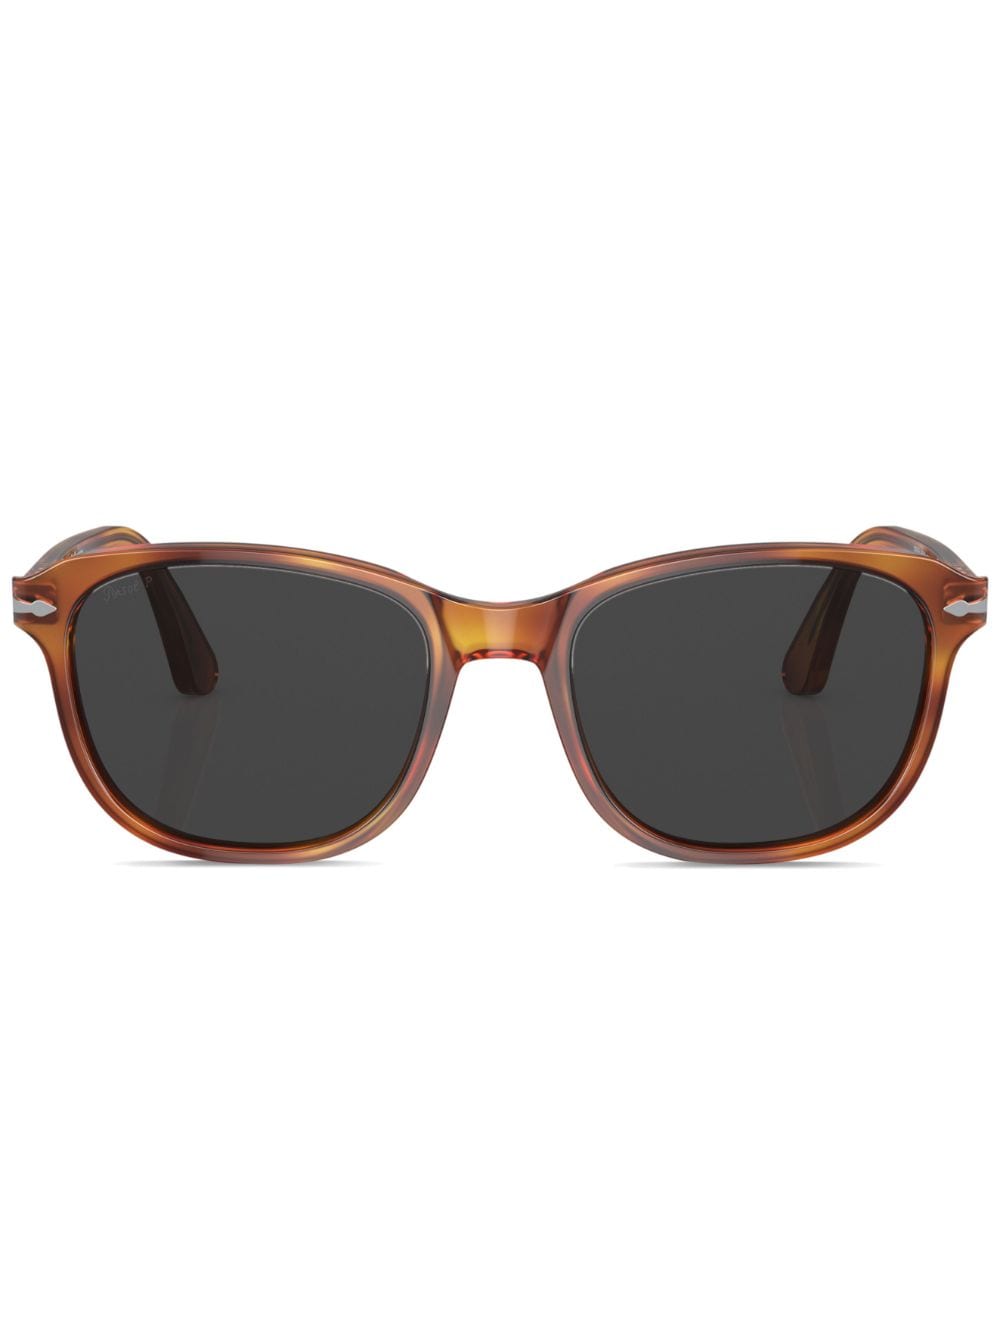 Image 1 of Persol round-frame sunglasses